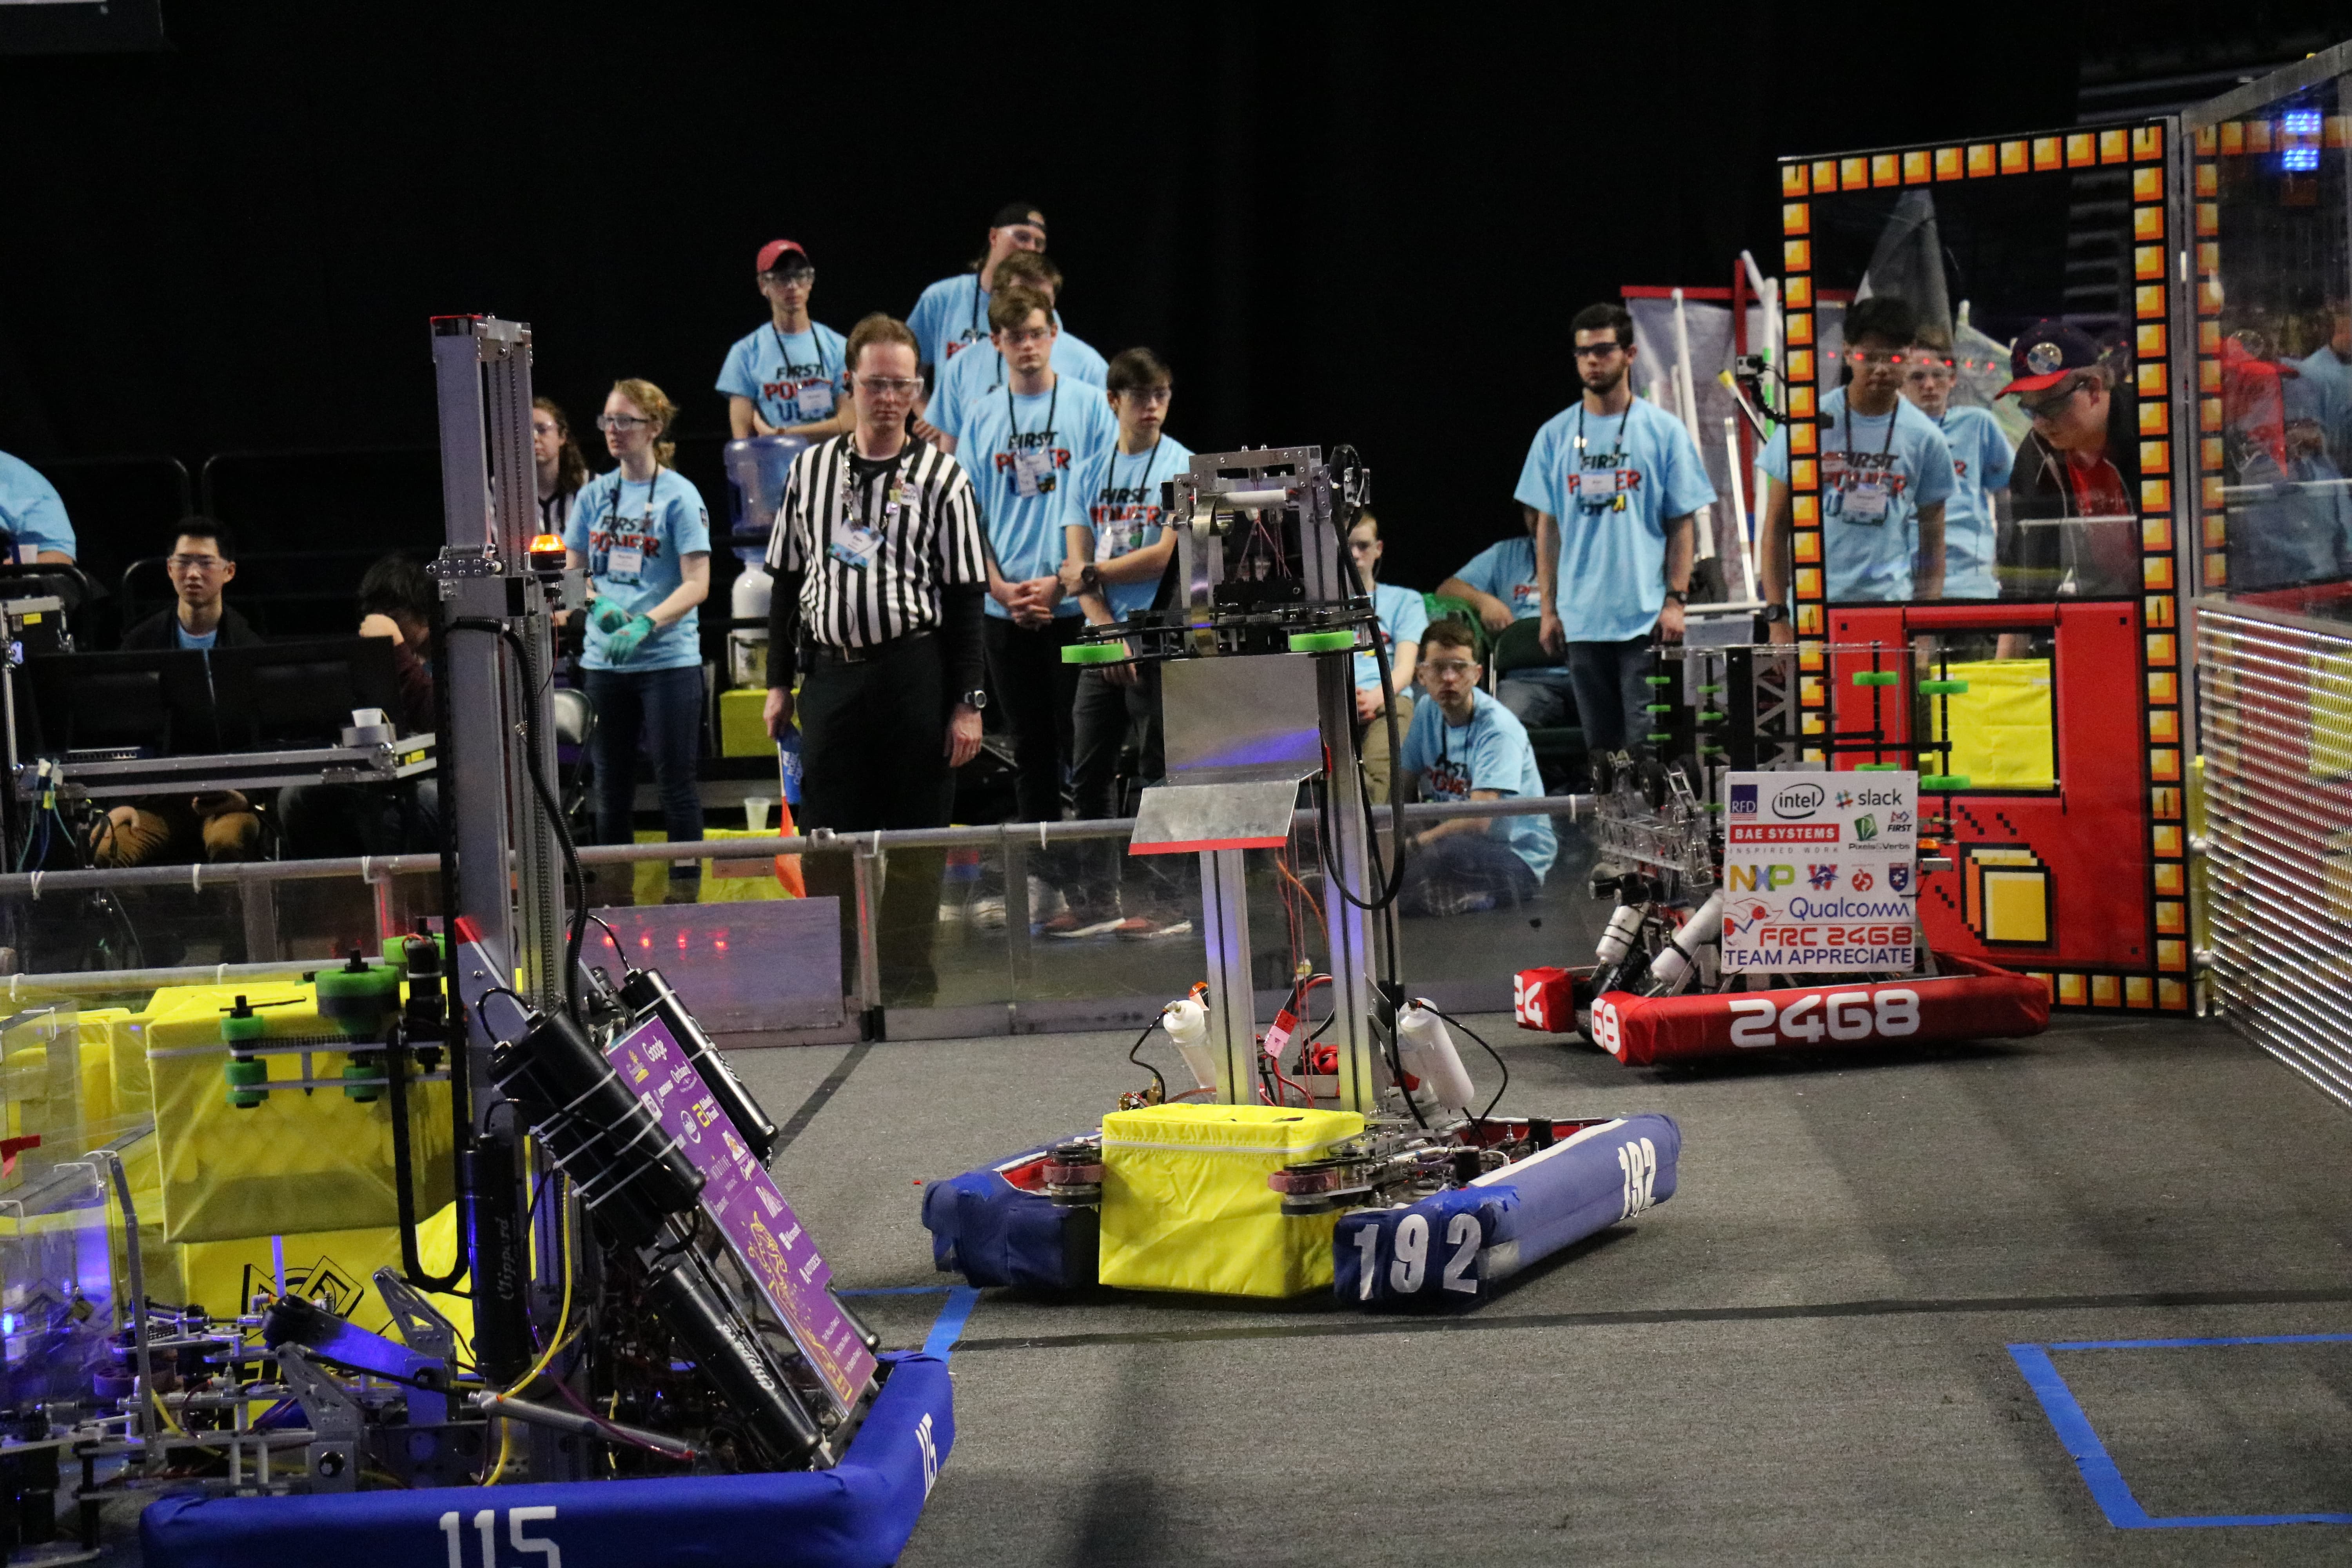 2018 robot at competition